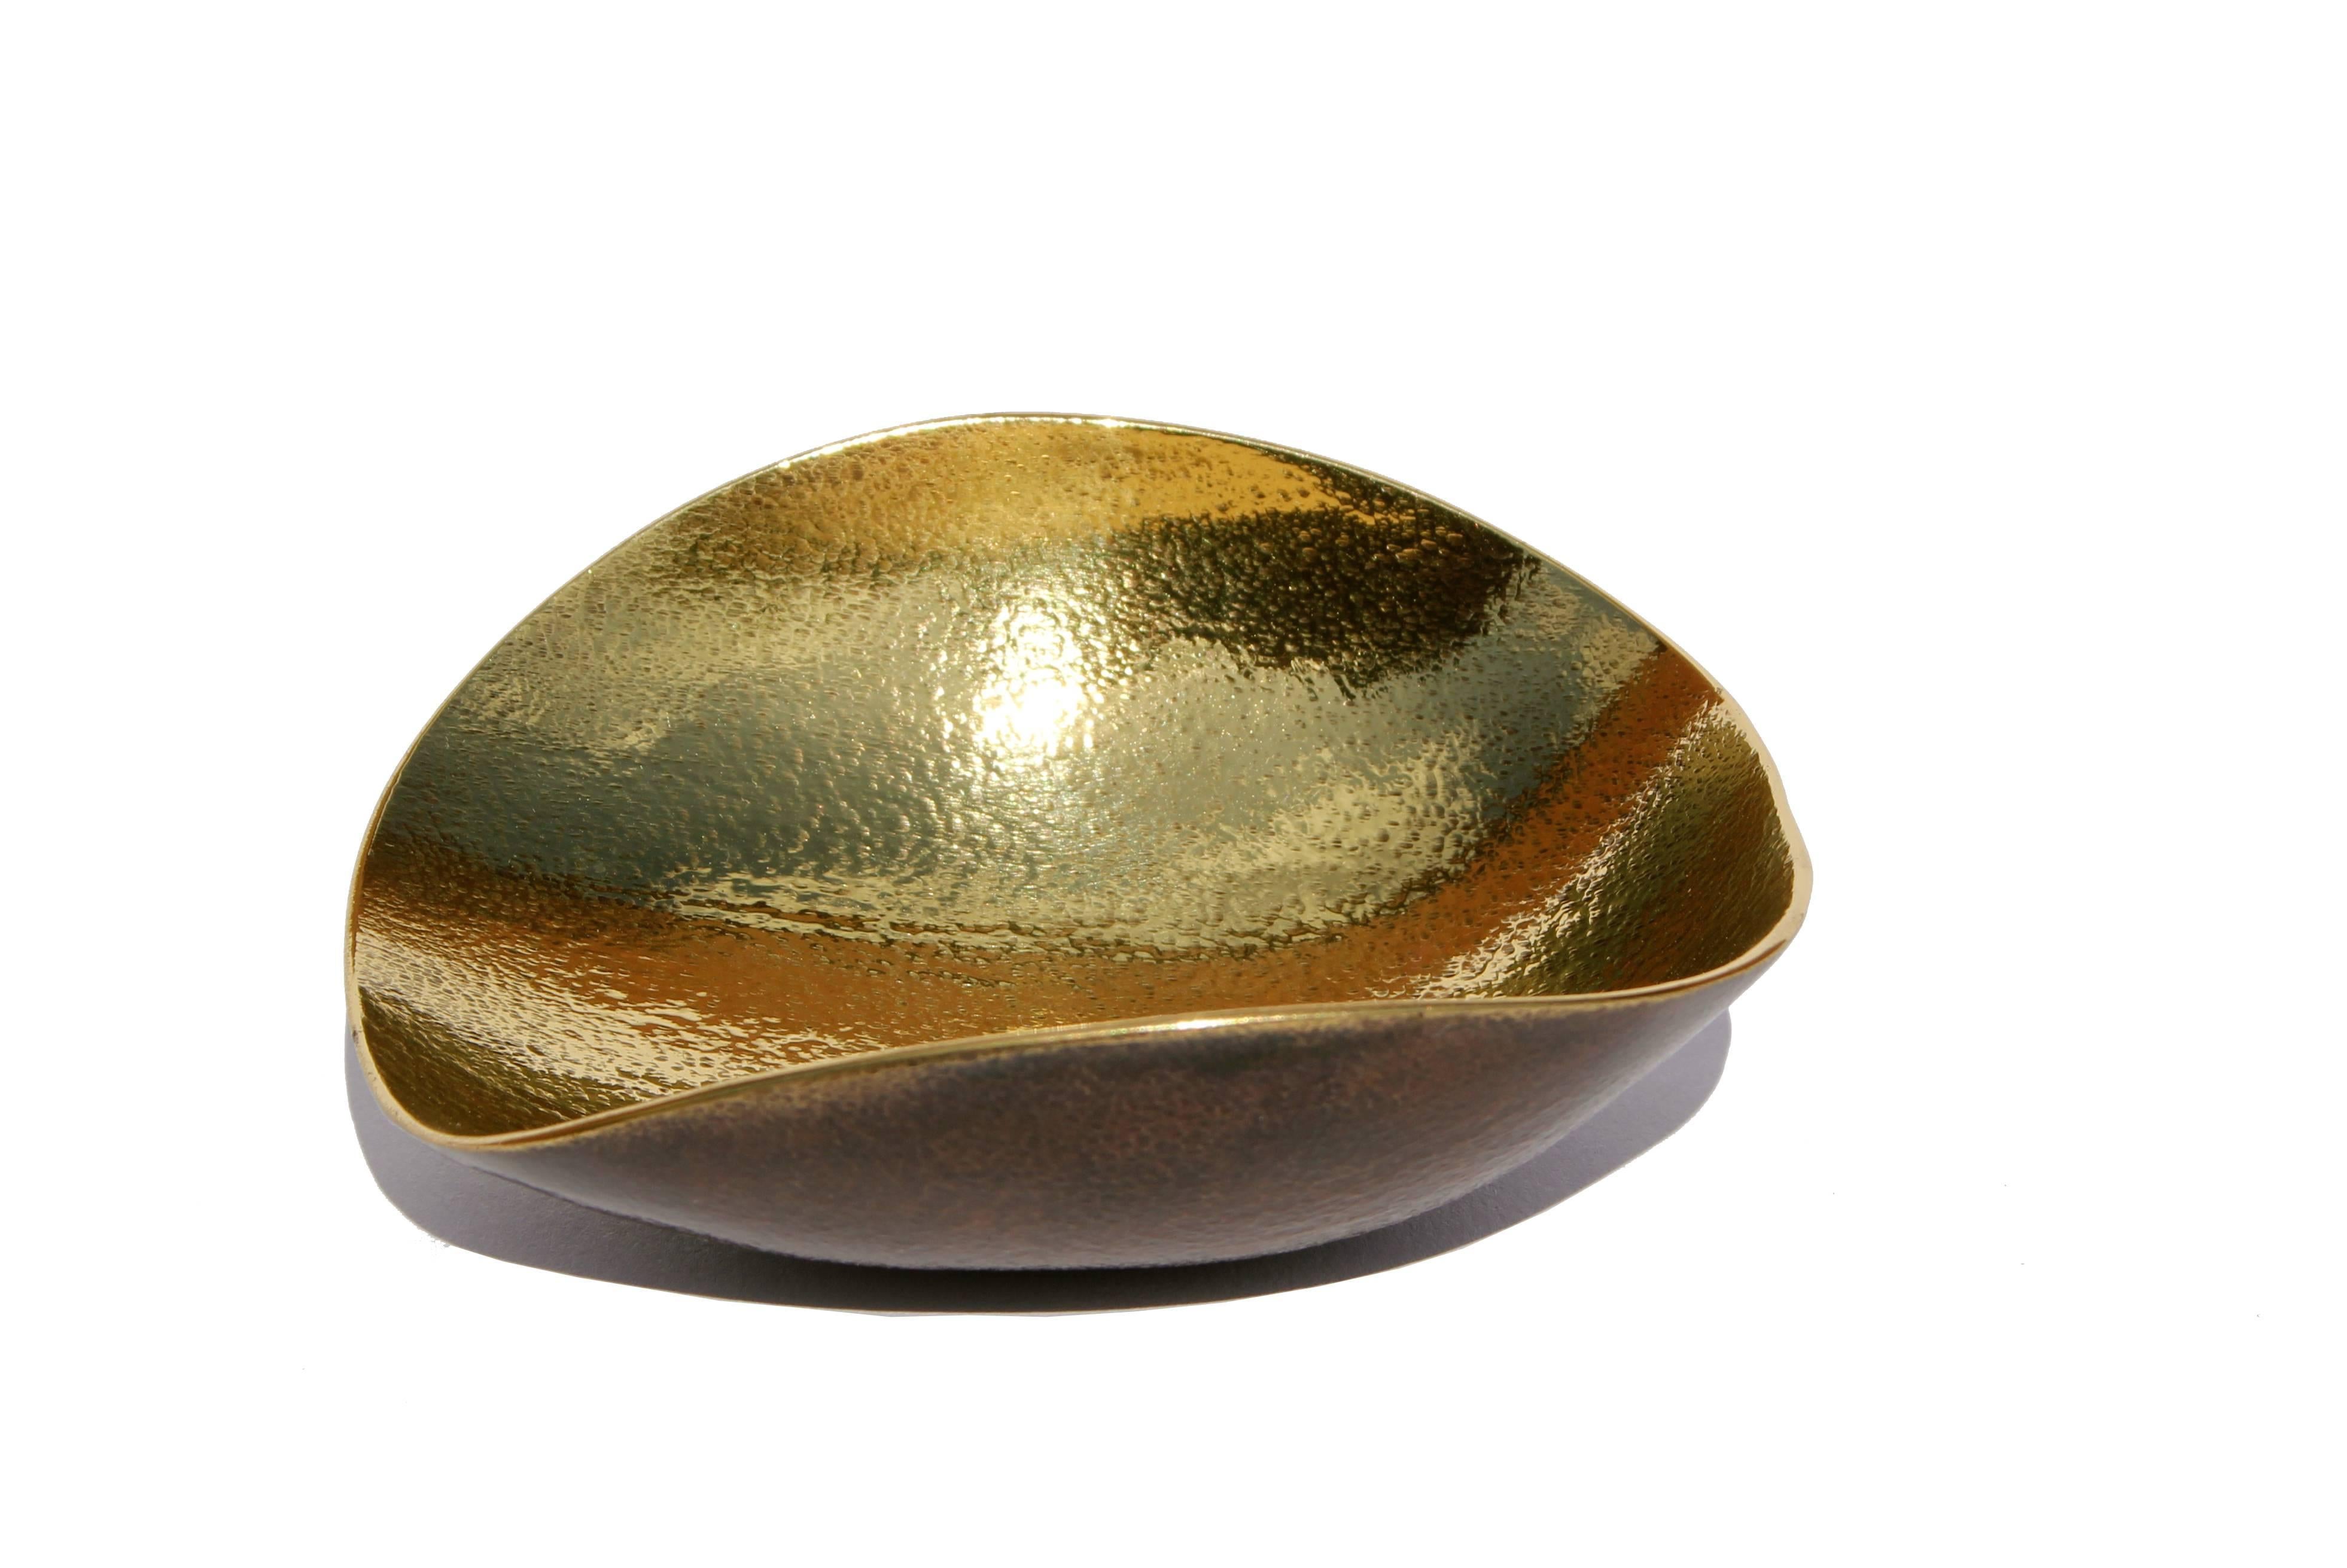 Handmade cast brass shallow bowl with a bronze patina on the outside and textured polished brass on the inside.

Each of those original and elegant bowls are handmade individually. Cast using very traditional techniques, the noble material is aged